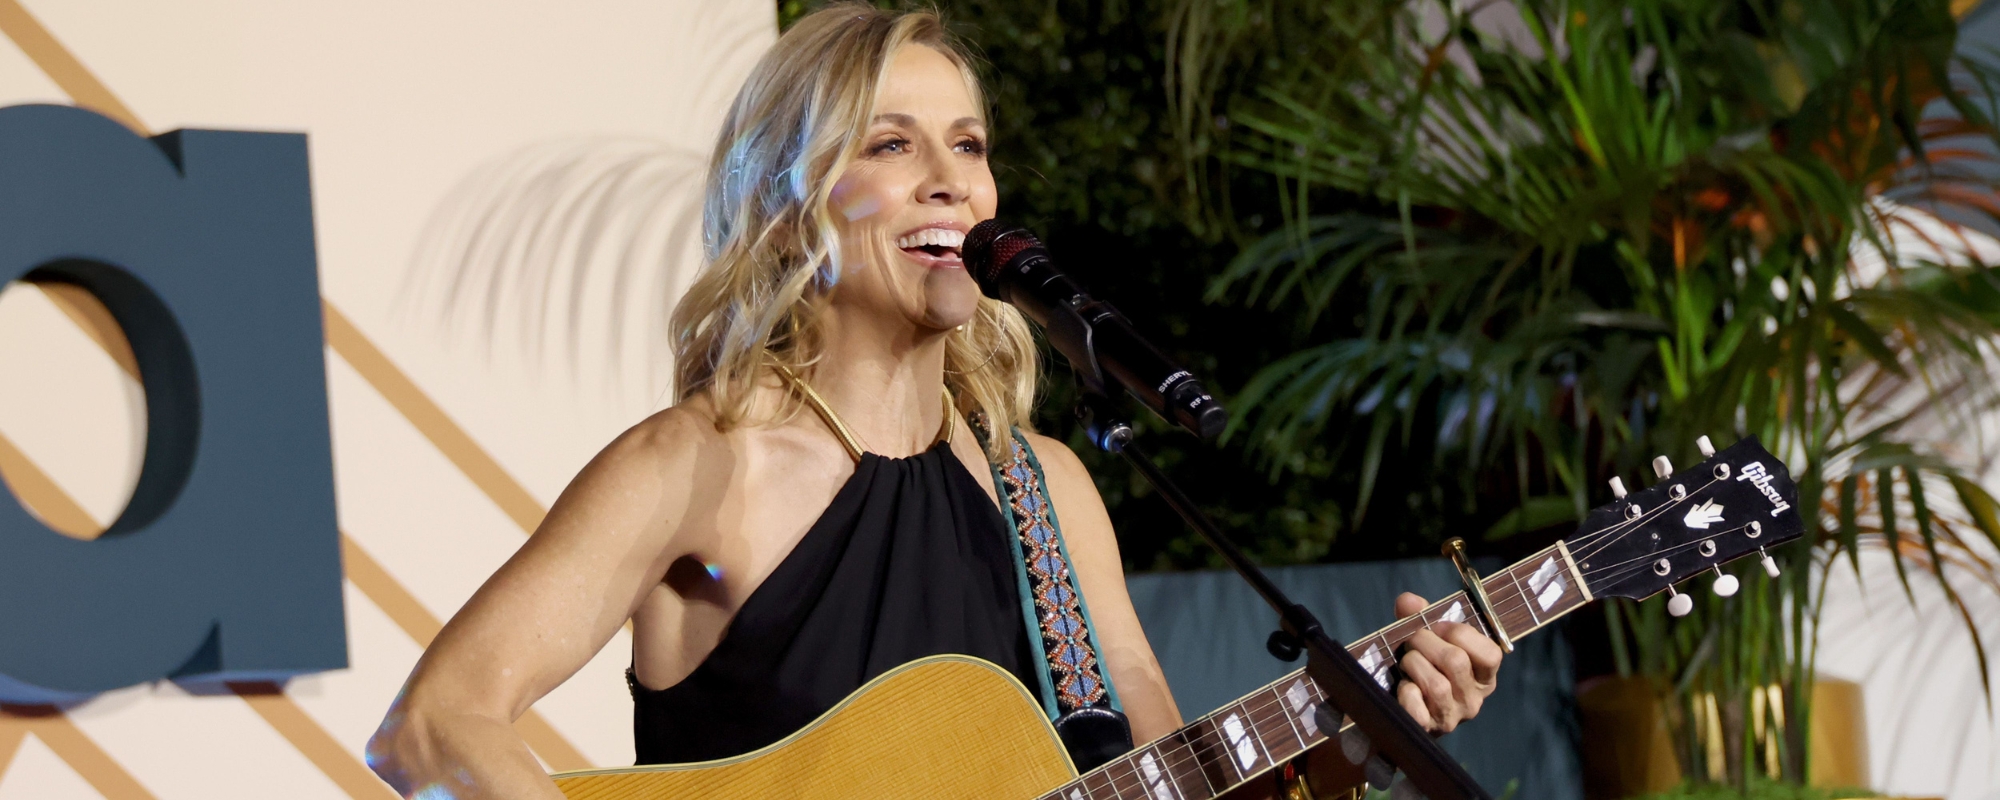 The Meaning Behind “Strong Enough” by Sheryl Crow